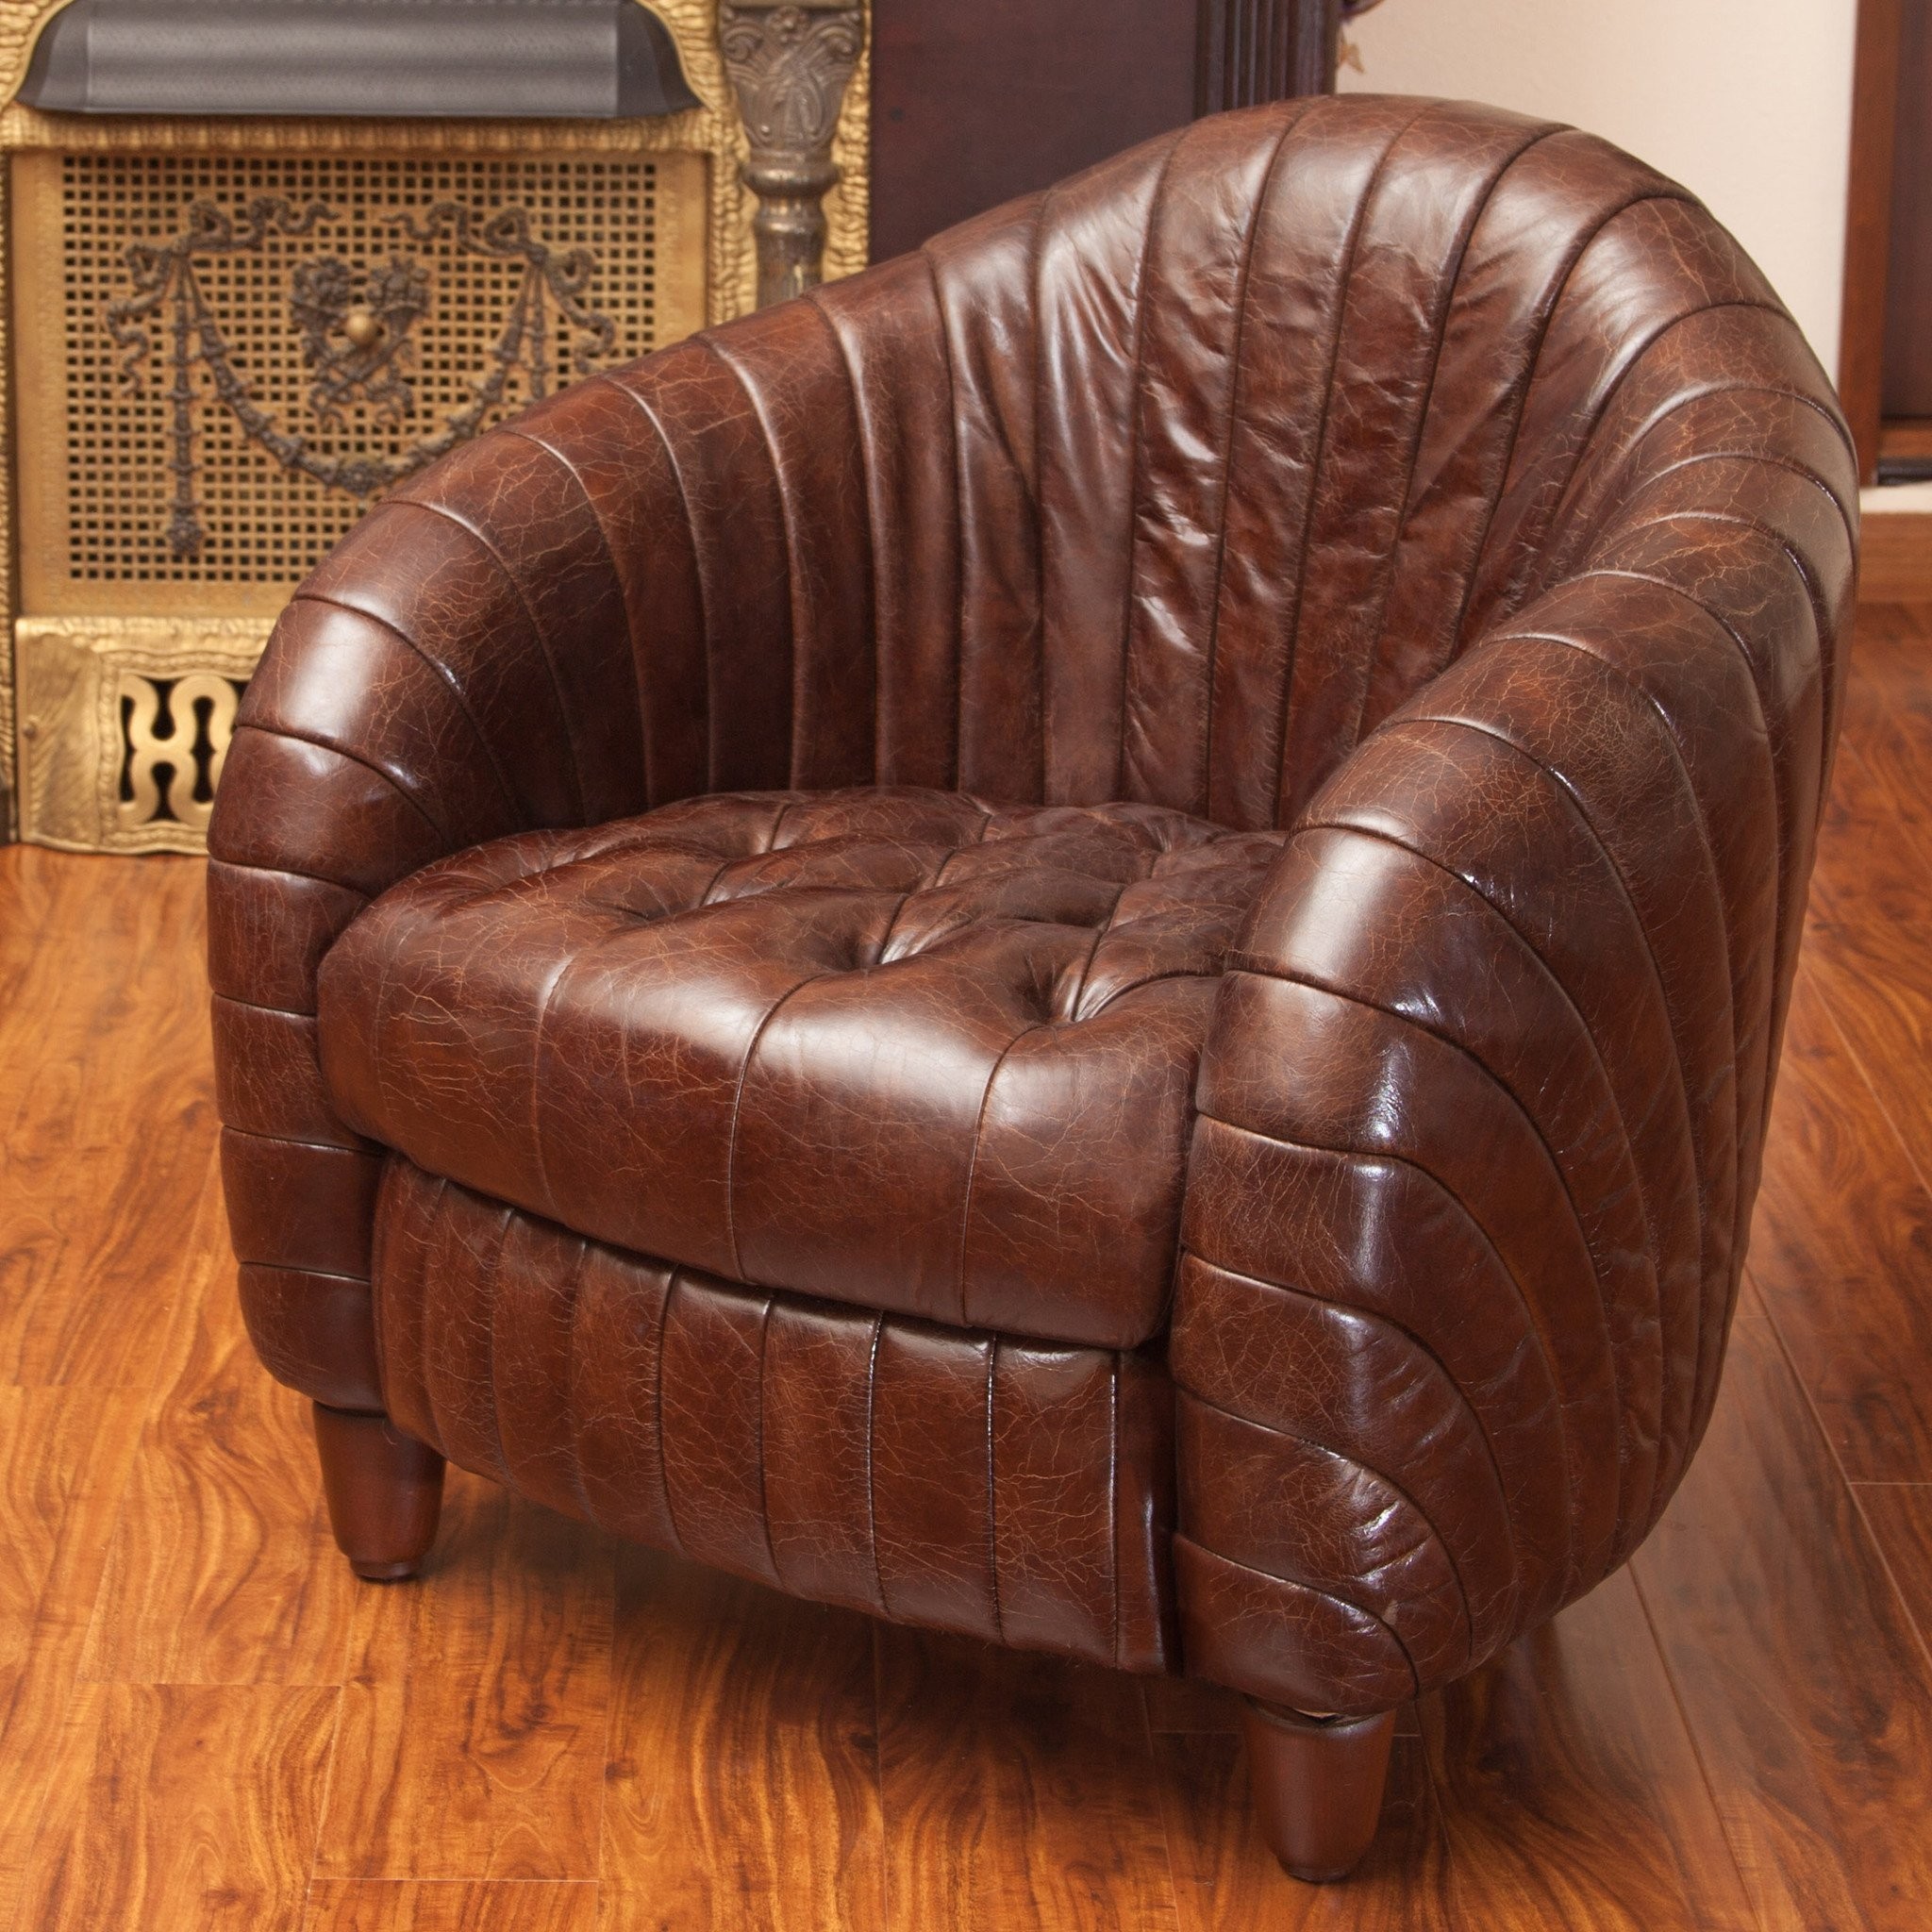 Aden Brown Tufted Channeled Leather Club Chair